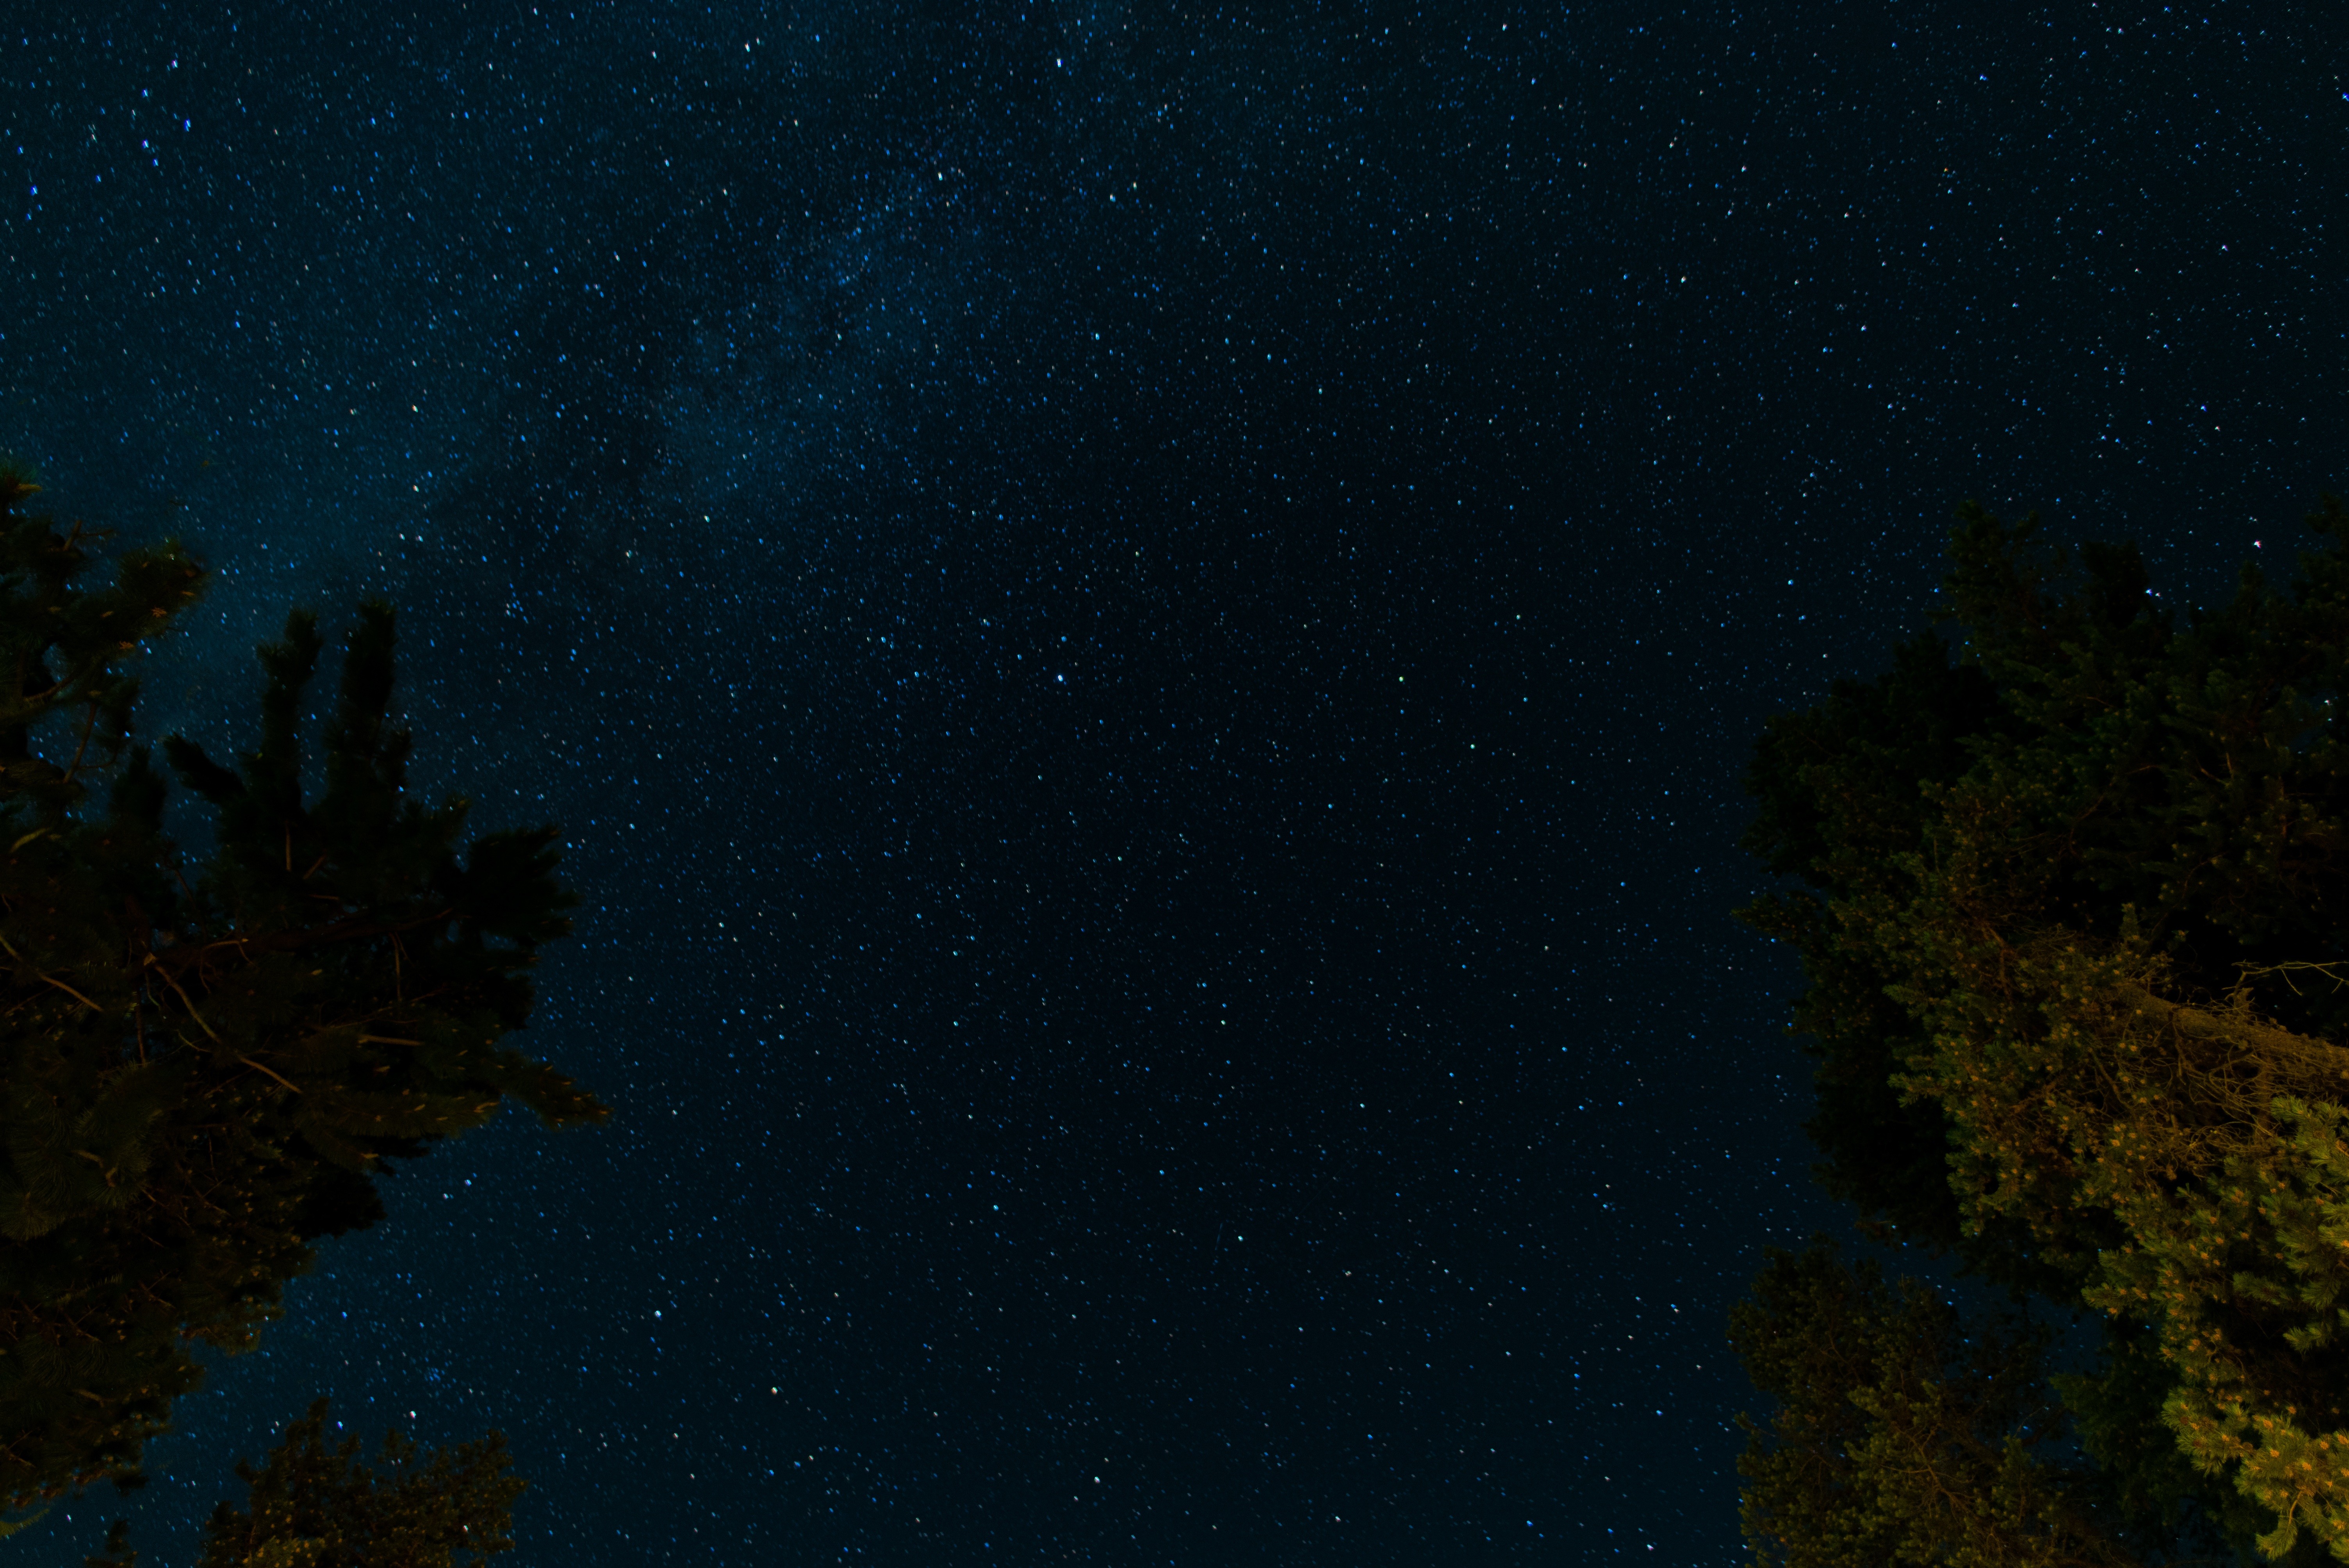 General 6016x4016 nature trees space stars sky looking up worm's eye view night sky